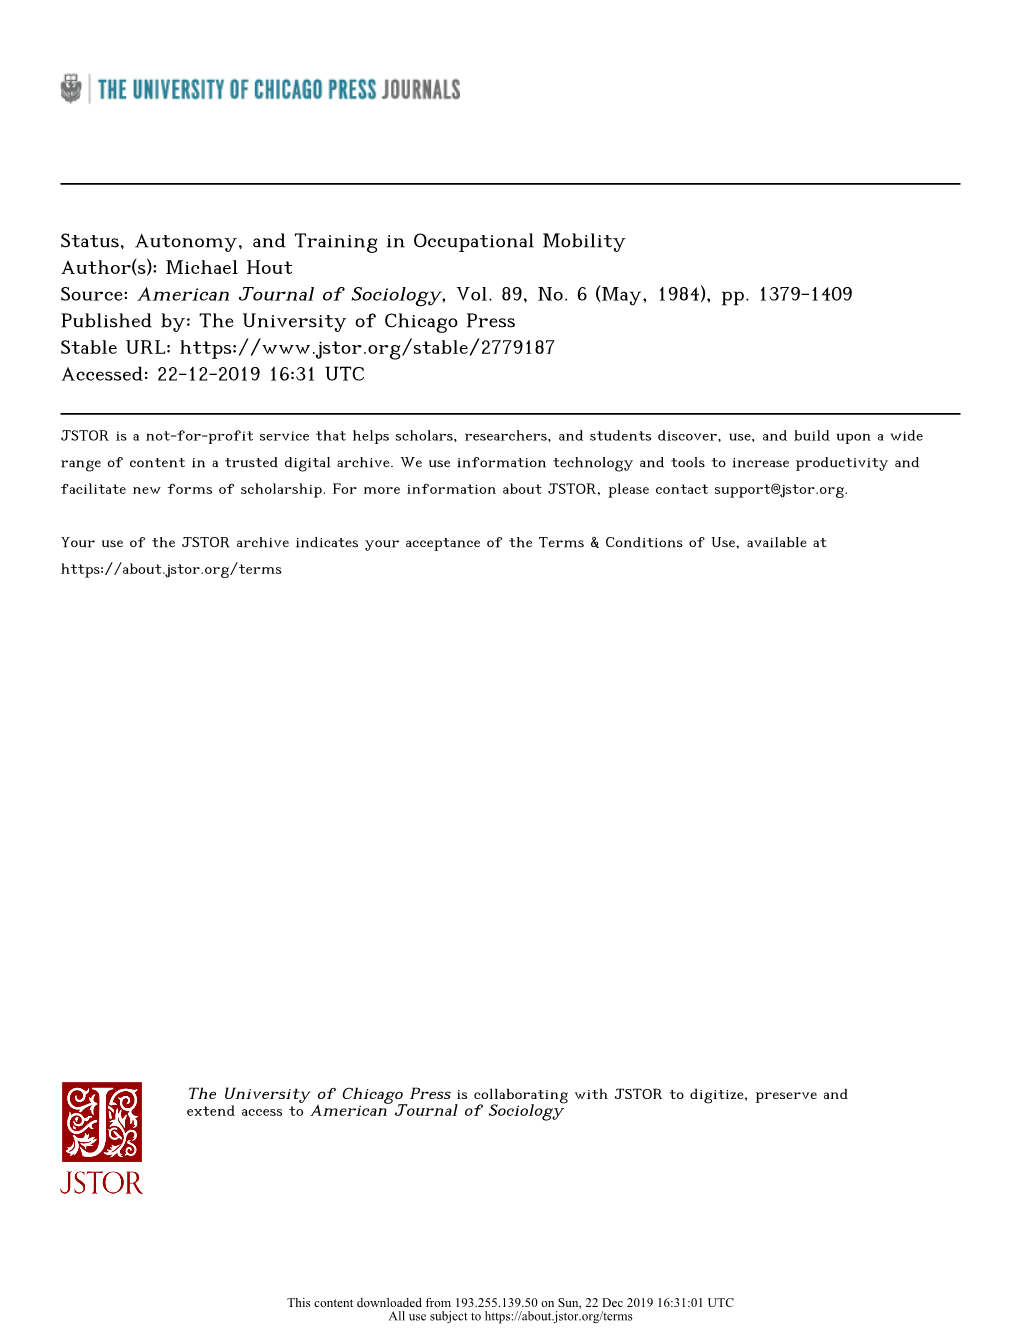 Status, Autonomy, and Training in Occupational Mobility Author(S): Michael Hout Source: American Journal of Sociology, Vol